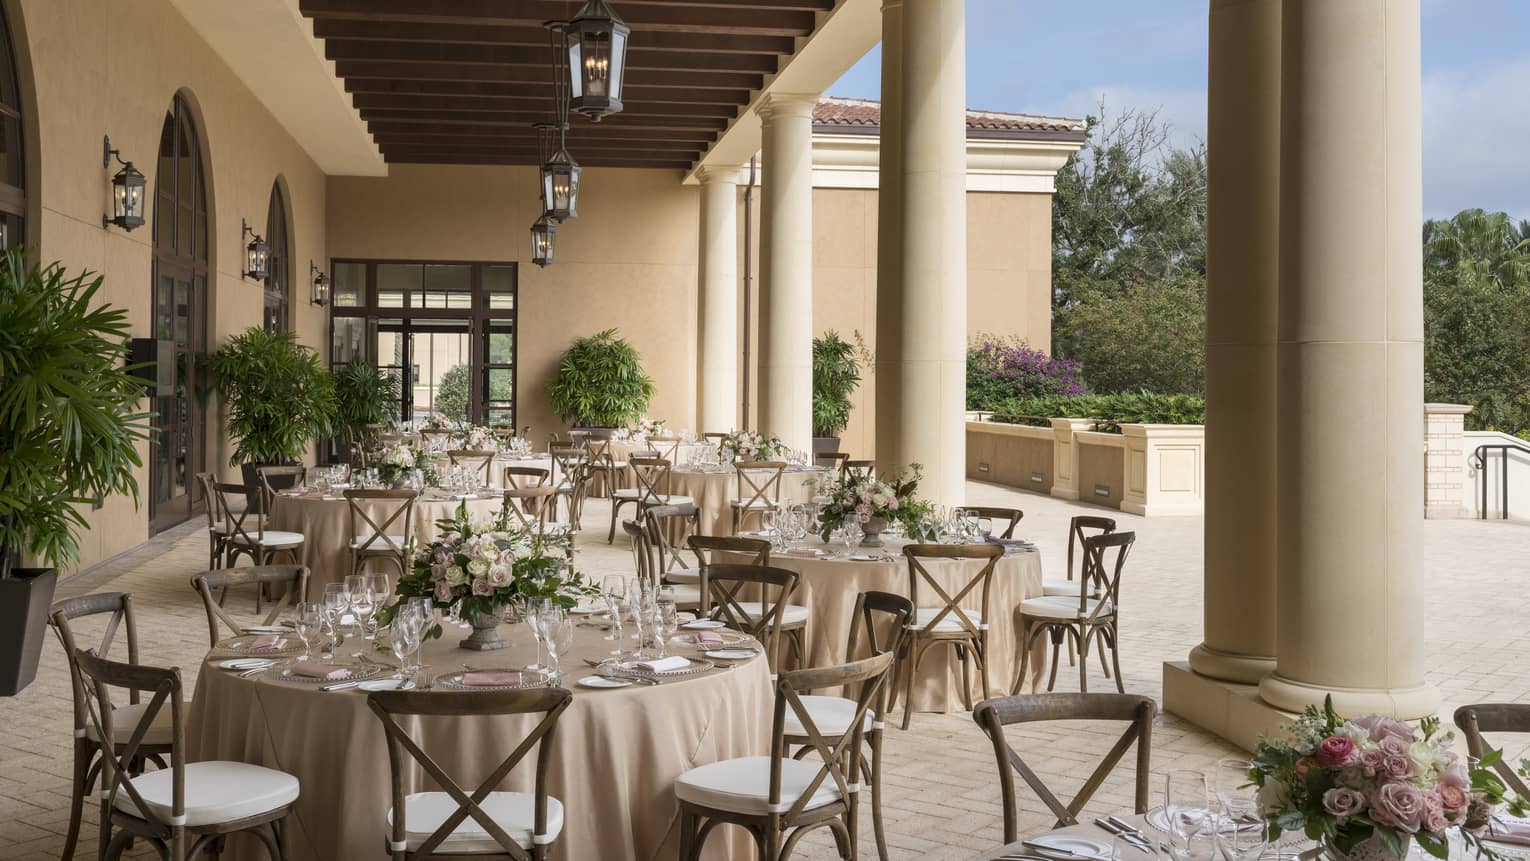 The Grand Ballroom Terrace is ready for guests with circular tables set with a cream table cloth, clear glass plates and tableware and a green floral arrangement in the center